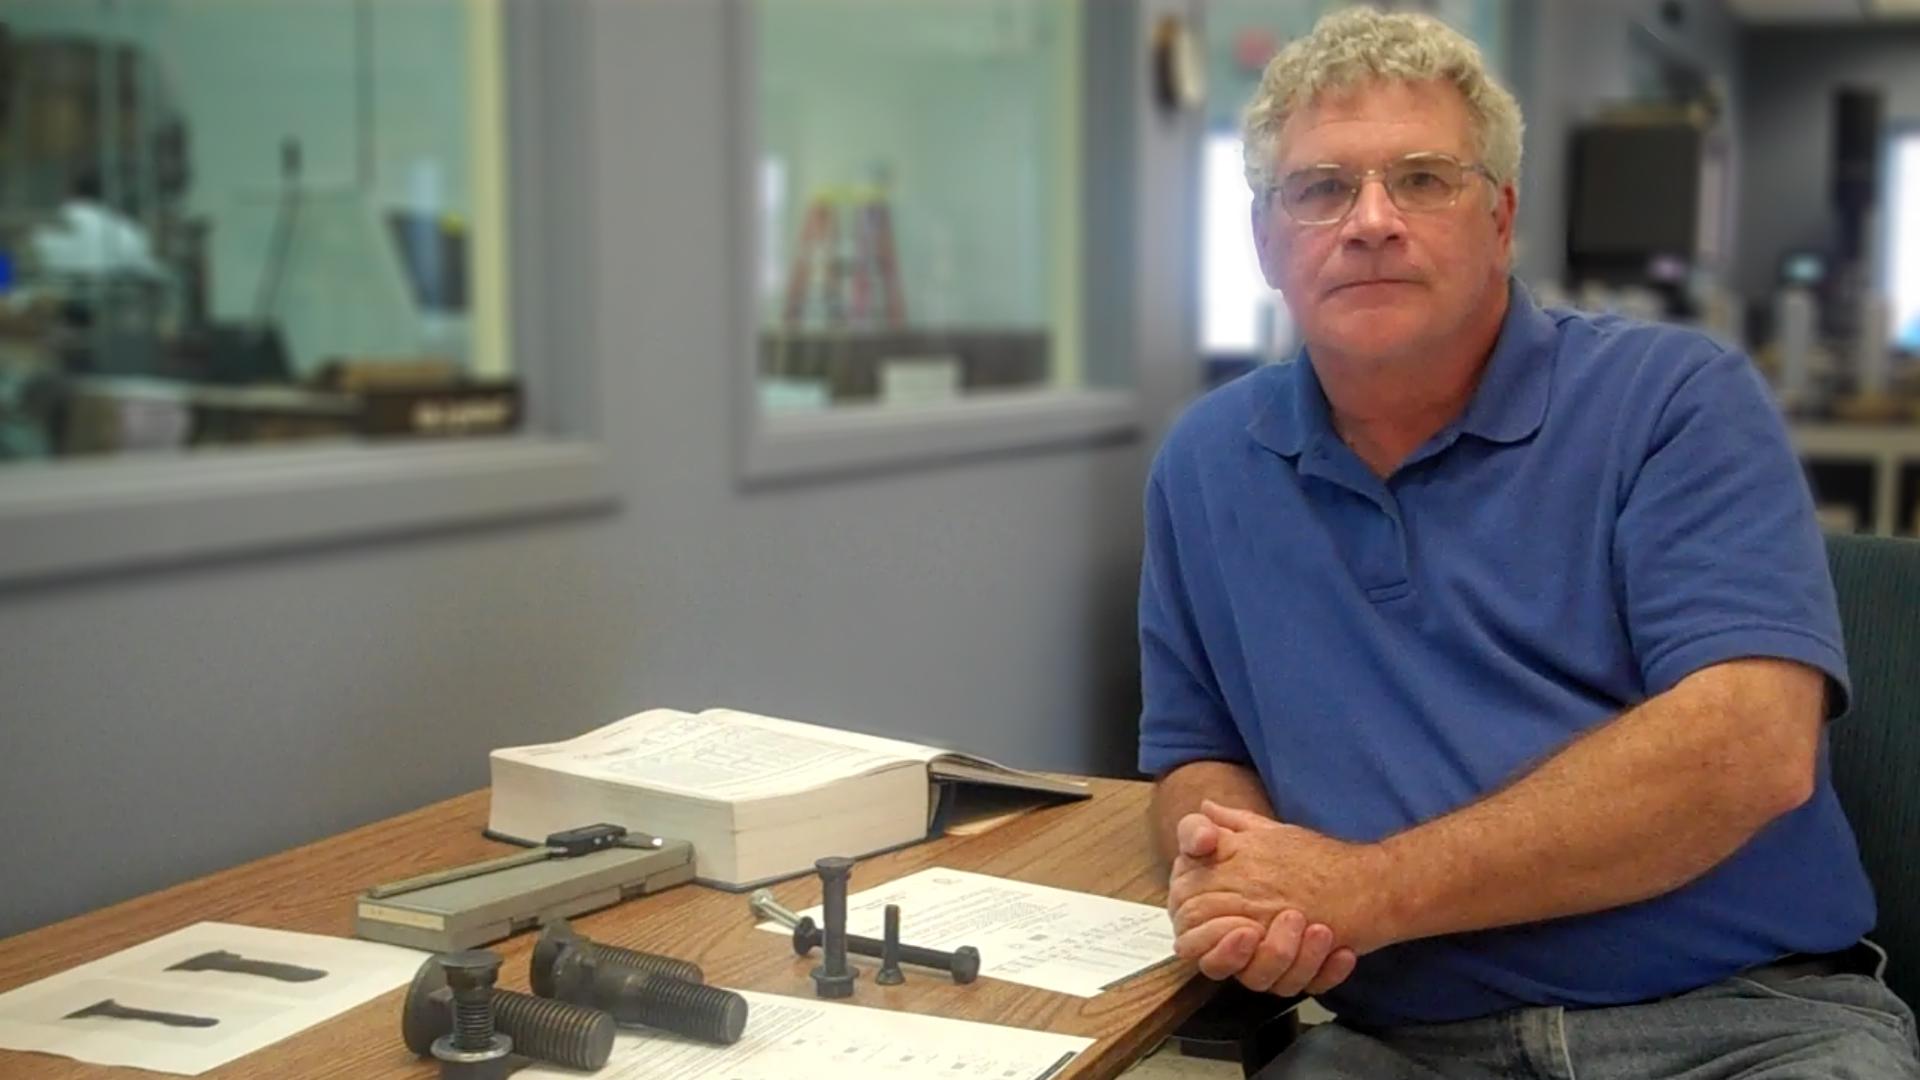 Ask the Expert: ASTM Strength Levels of A449 and A354 vs. SAE Strength Levels Grades 5 and 8